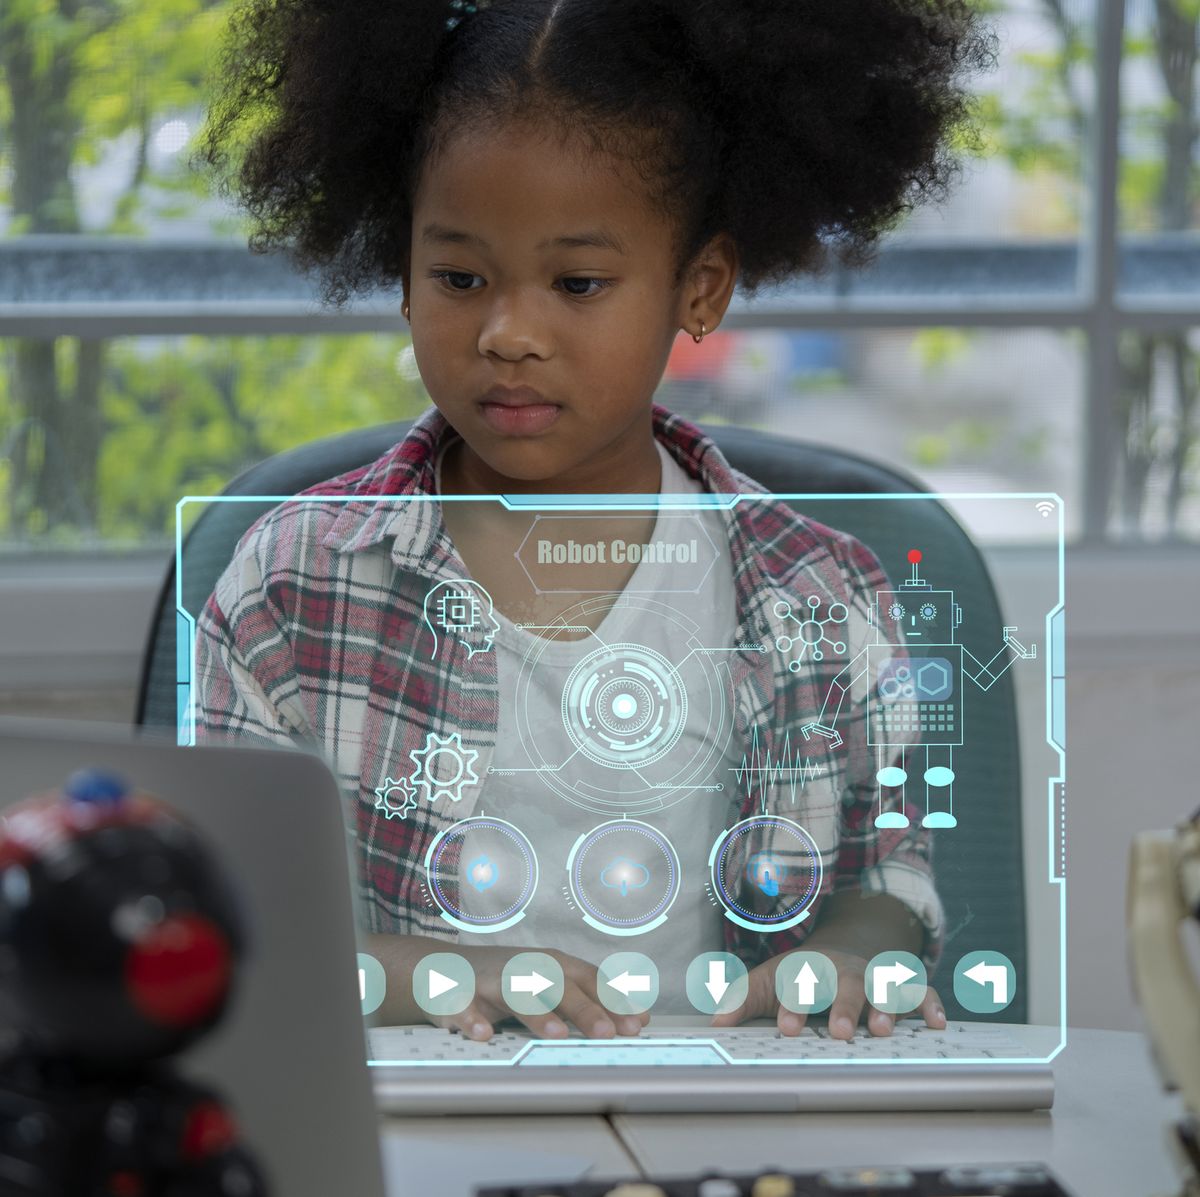 https://hips.hearstapps.com/hmg-prod/images/girl-thinking-and-analyzing-a-robot-program-royalty-free-image-1651867434.jpg?crop=0.668xw:1.00xh;0.141xw,0&resize=1200:*